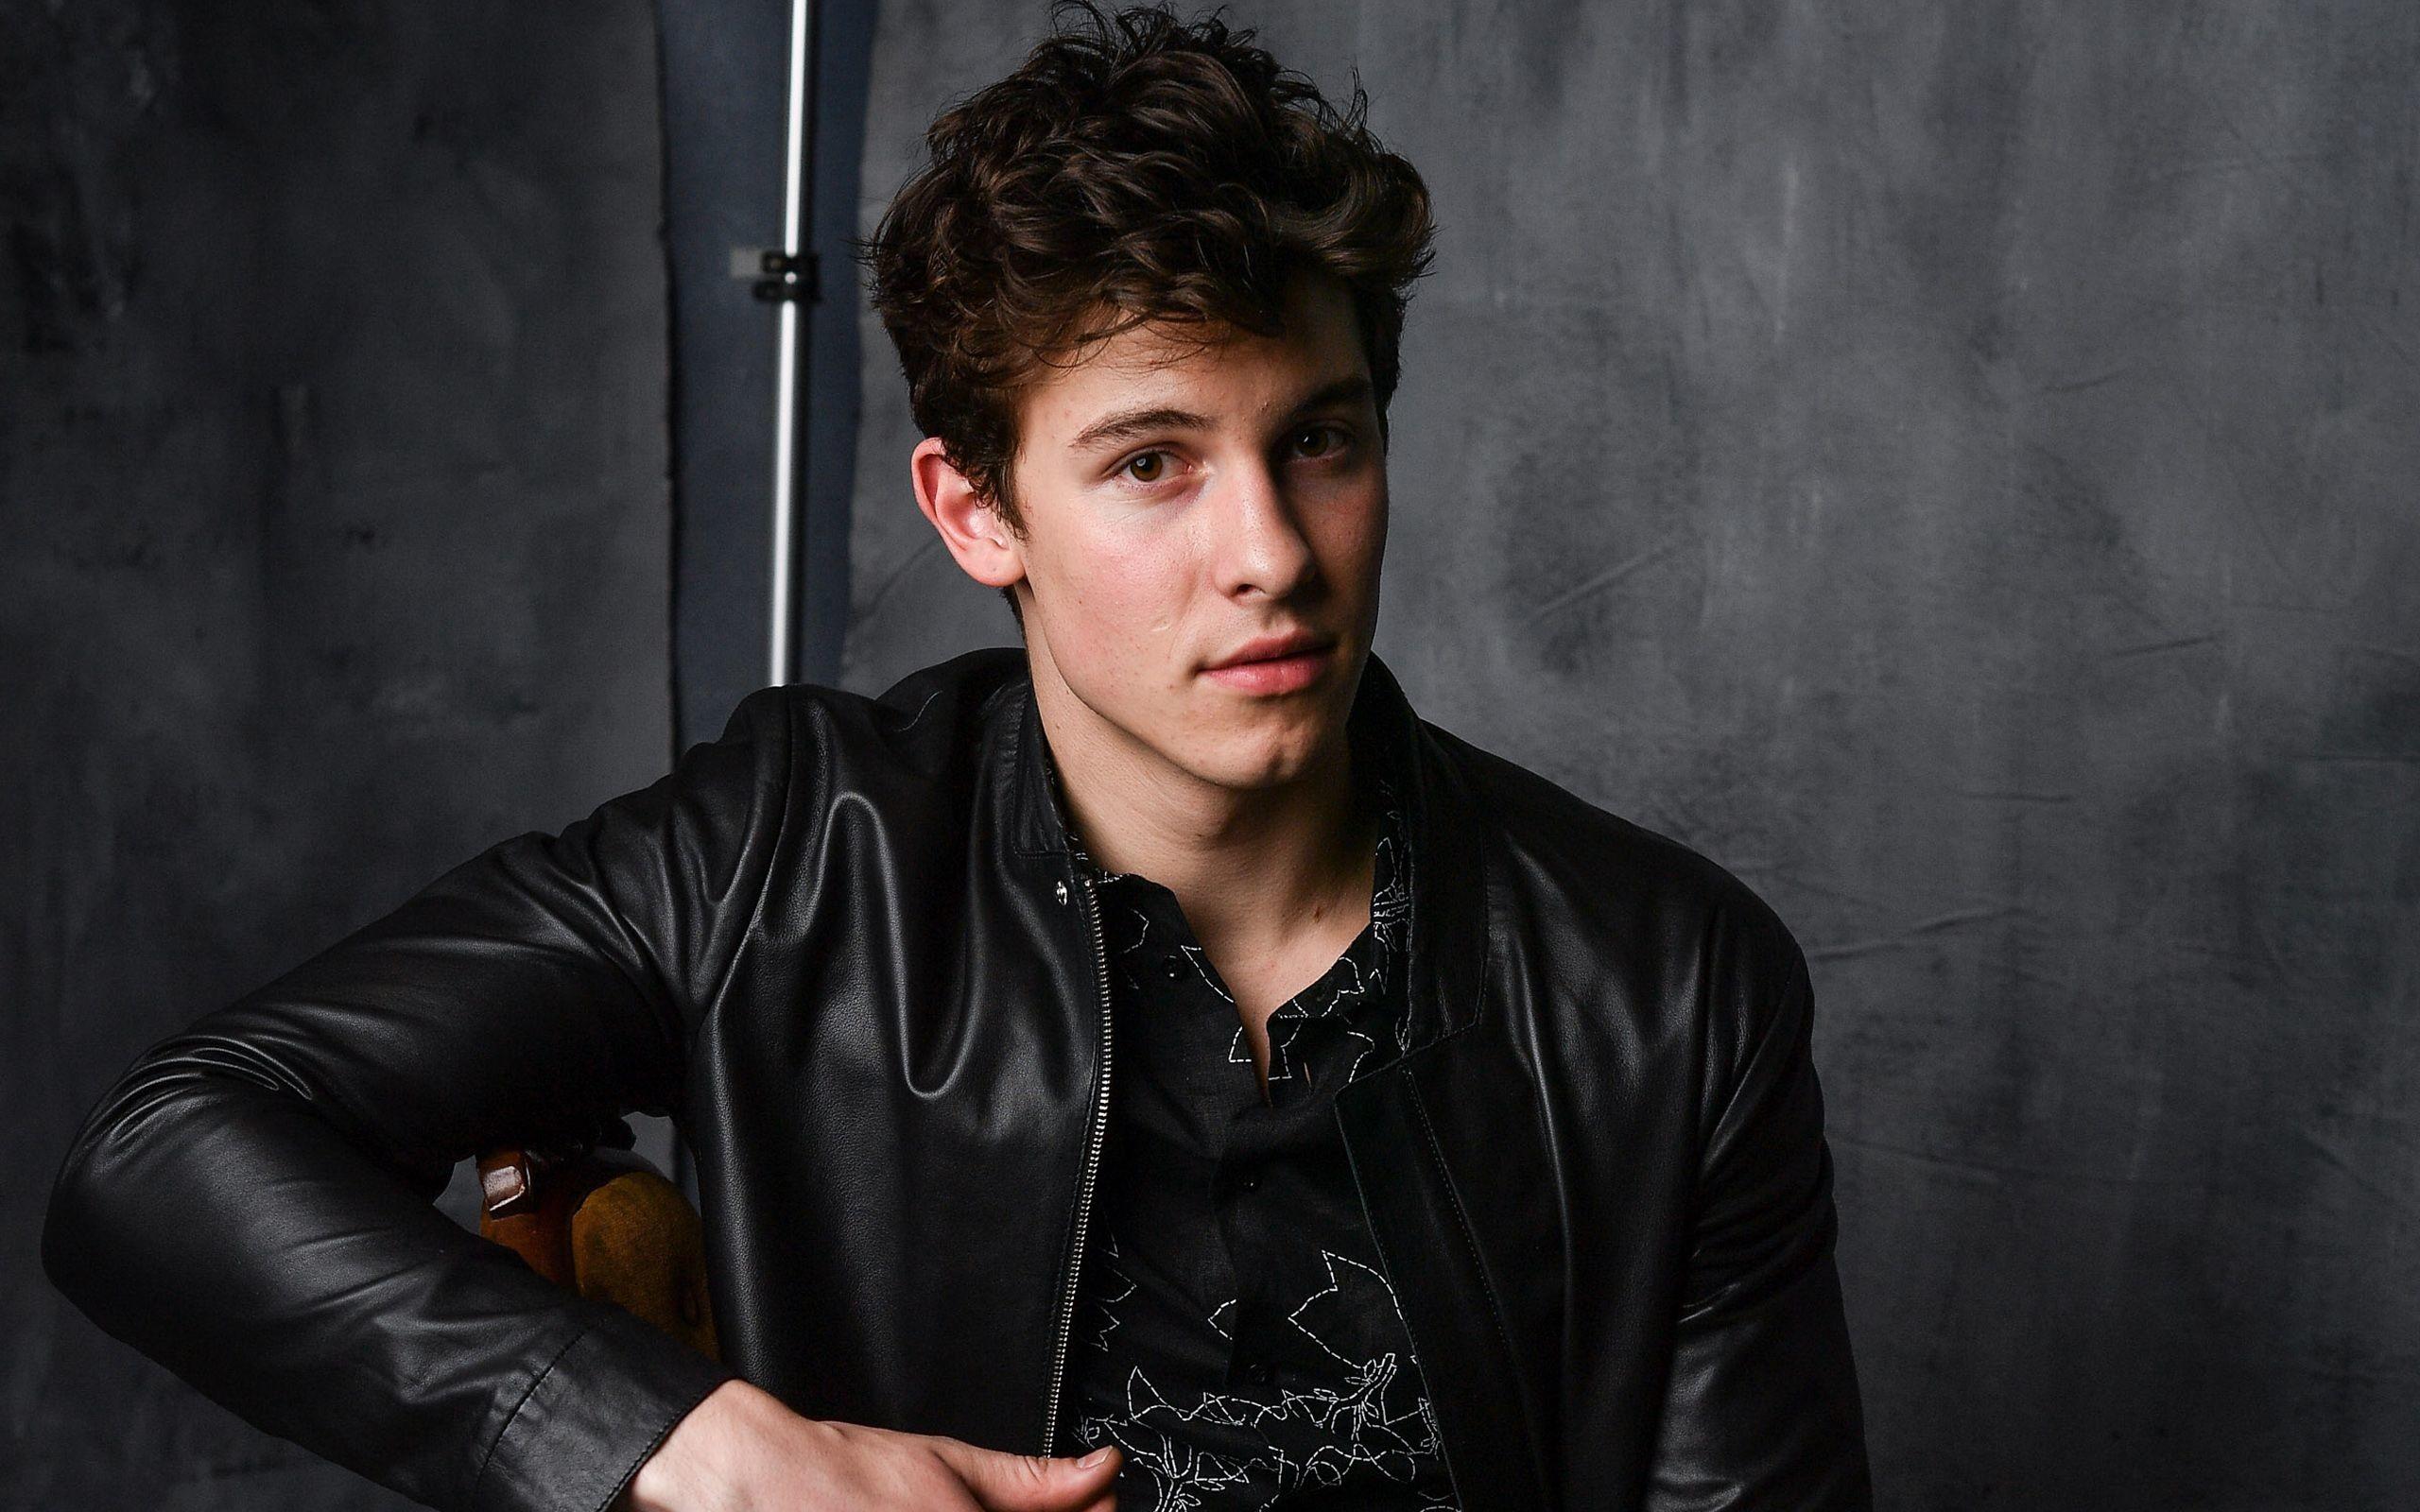 Latest High Resolution Wallpaper Of Shawn Mendes In A Leather Jacket